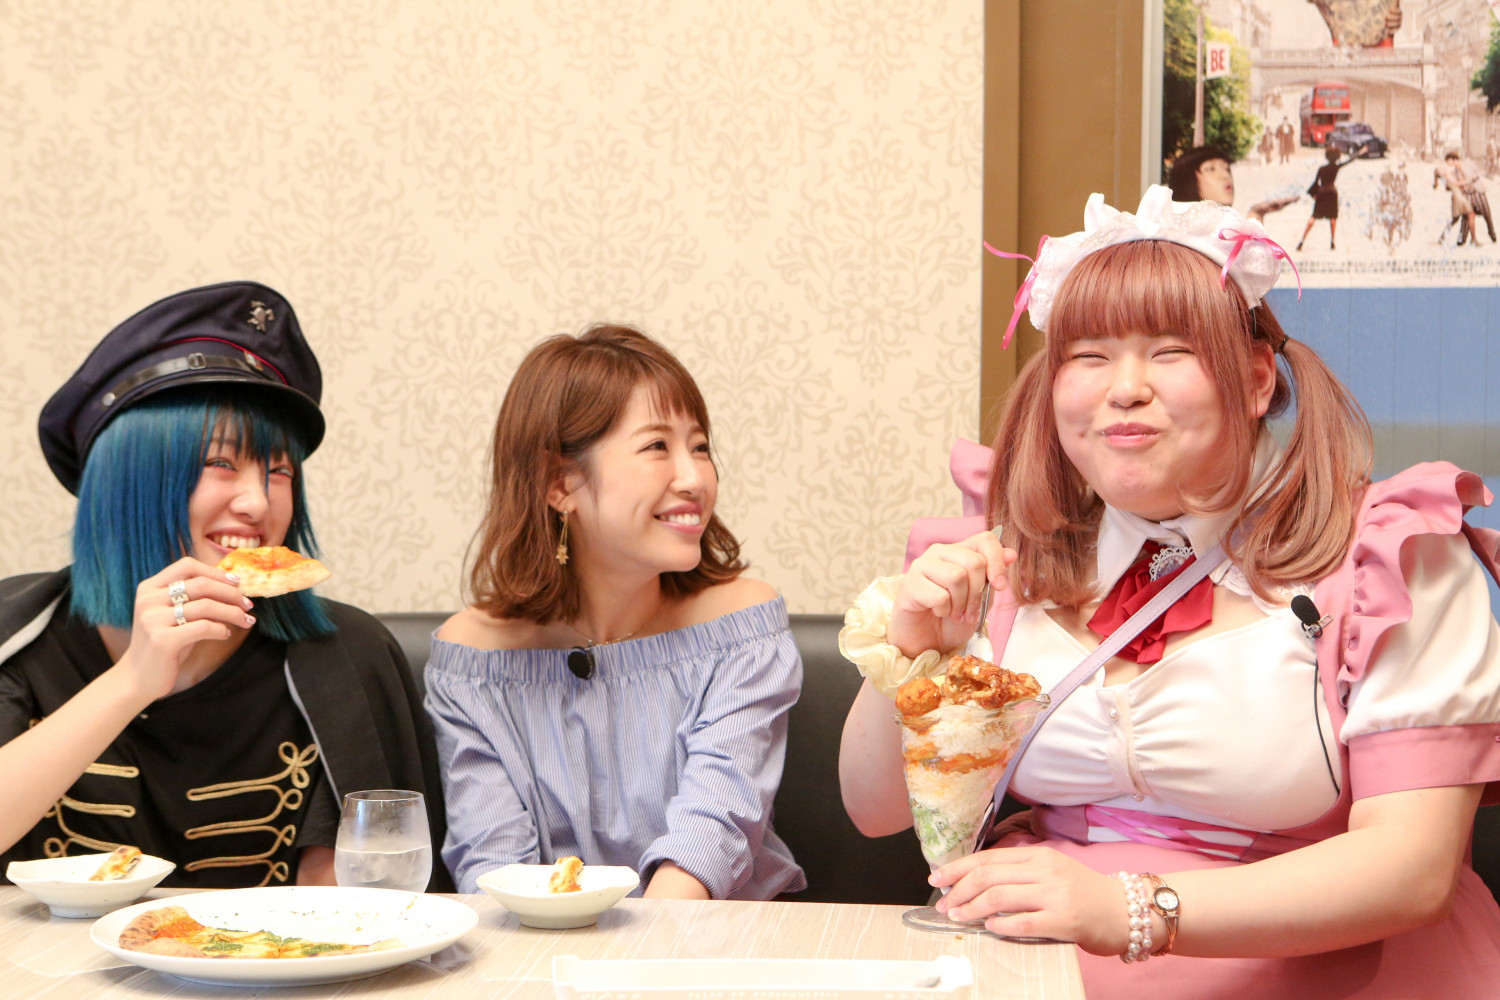 Bigger Maids=Bigger Happiness! The Maids at the Chubby Maid Café & Bar “Shangrila” Are Super Lovely!